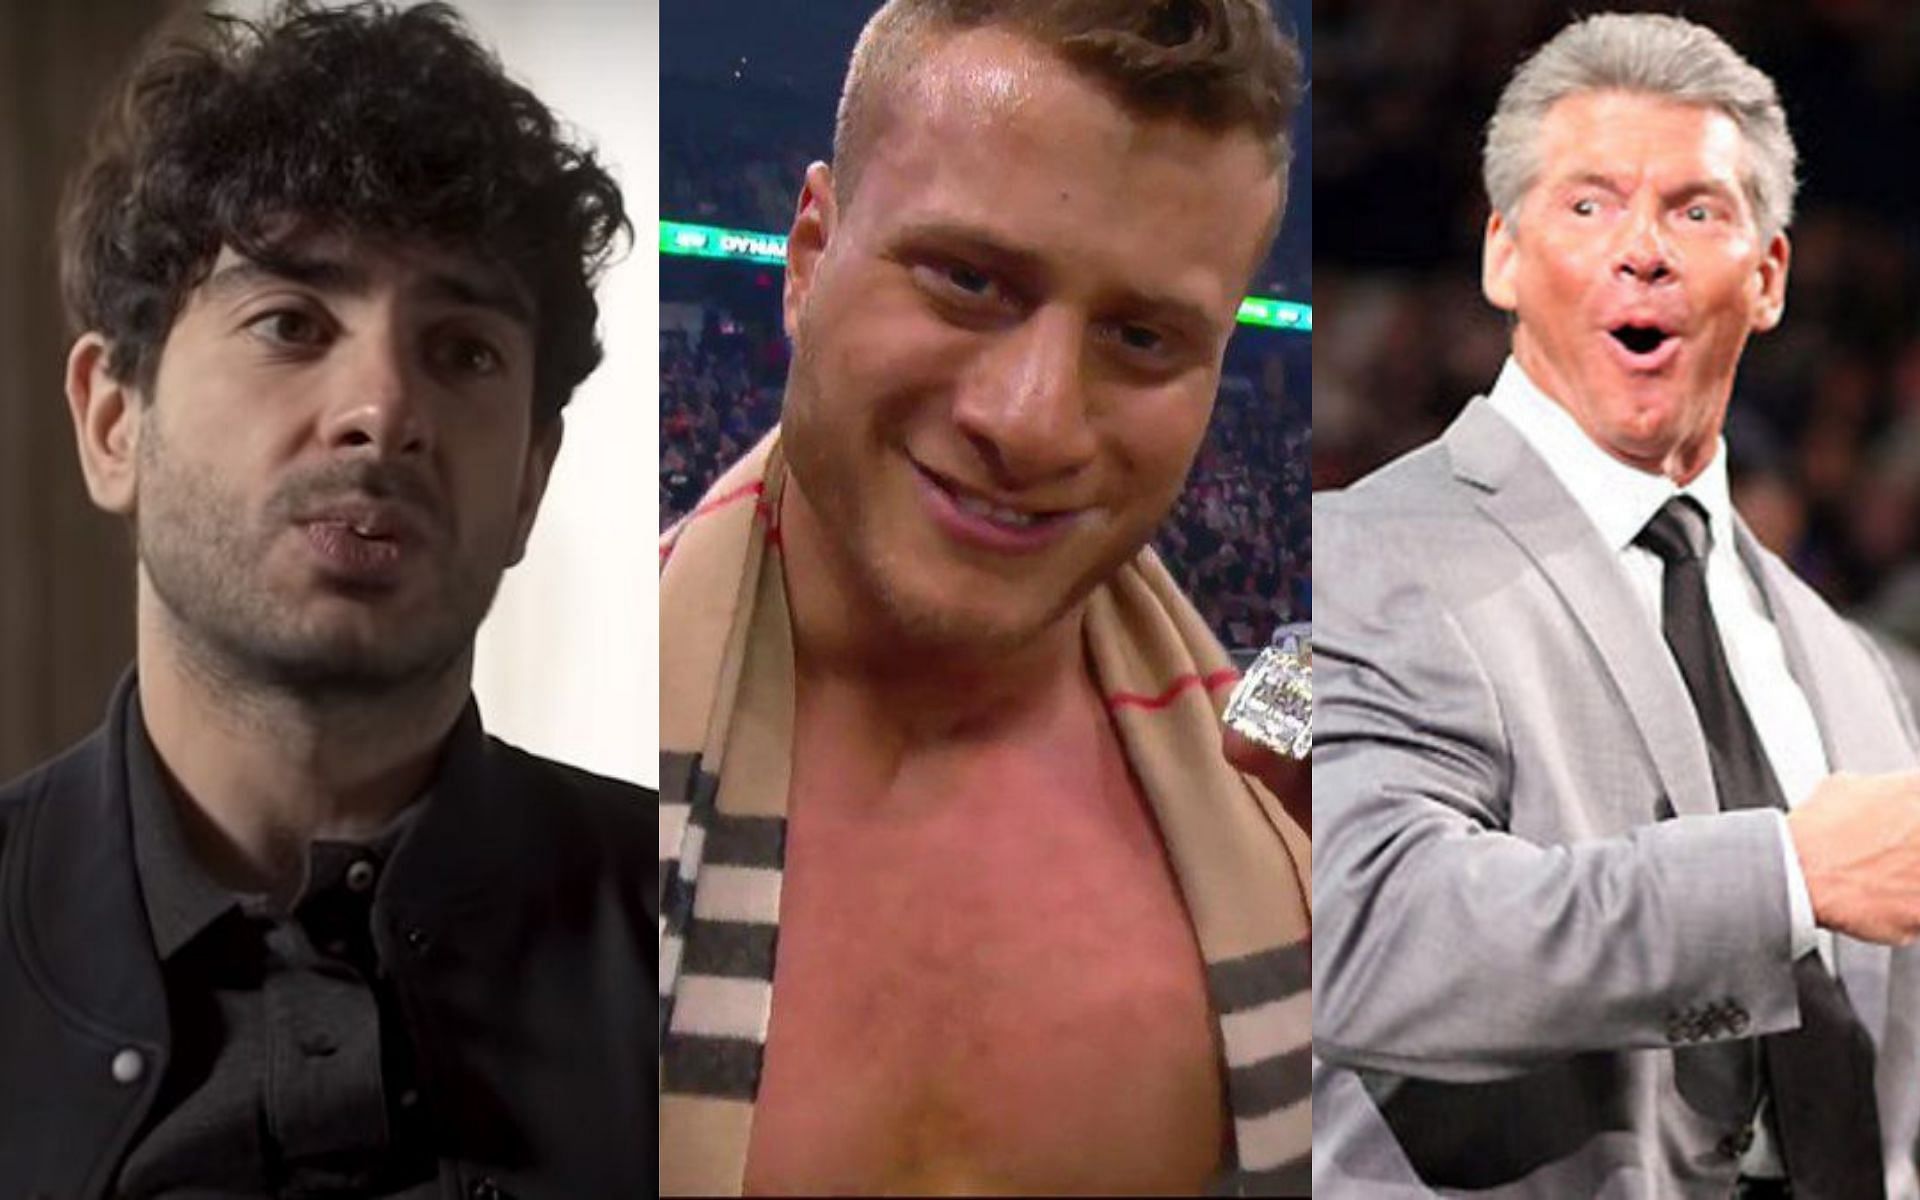 MJF might be looking for a way out of AEW